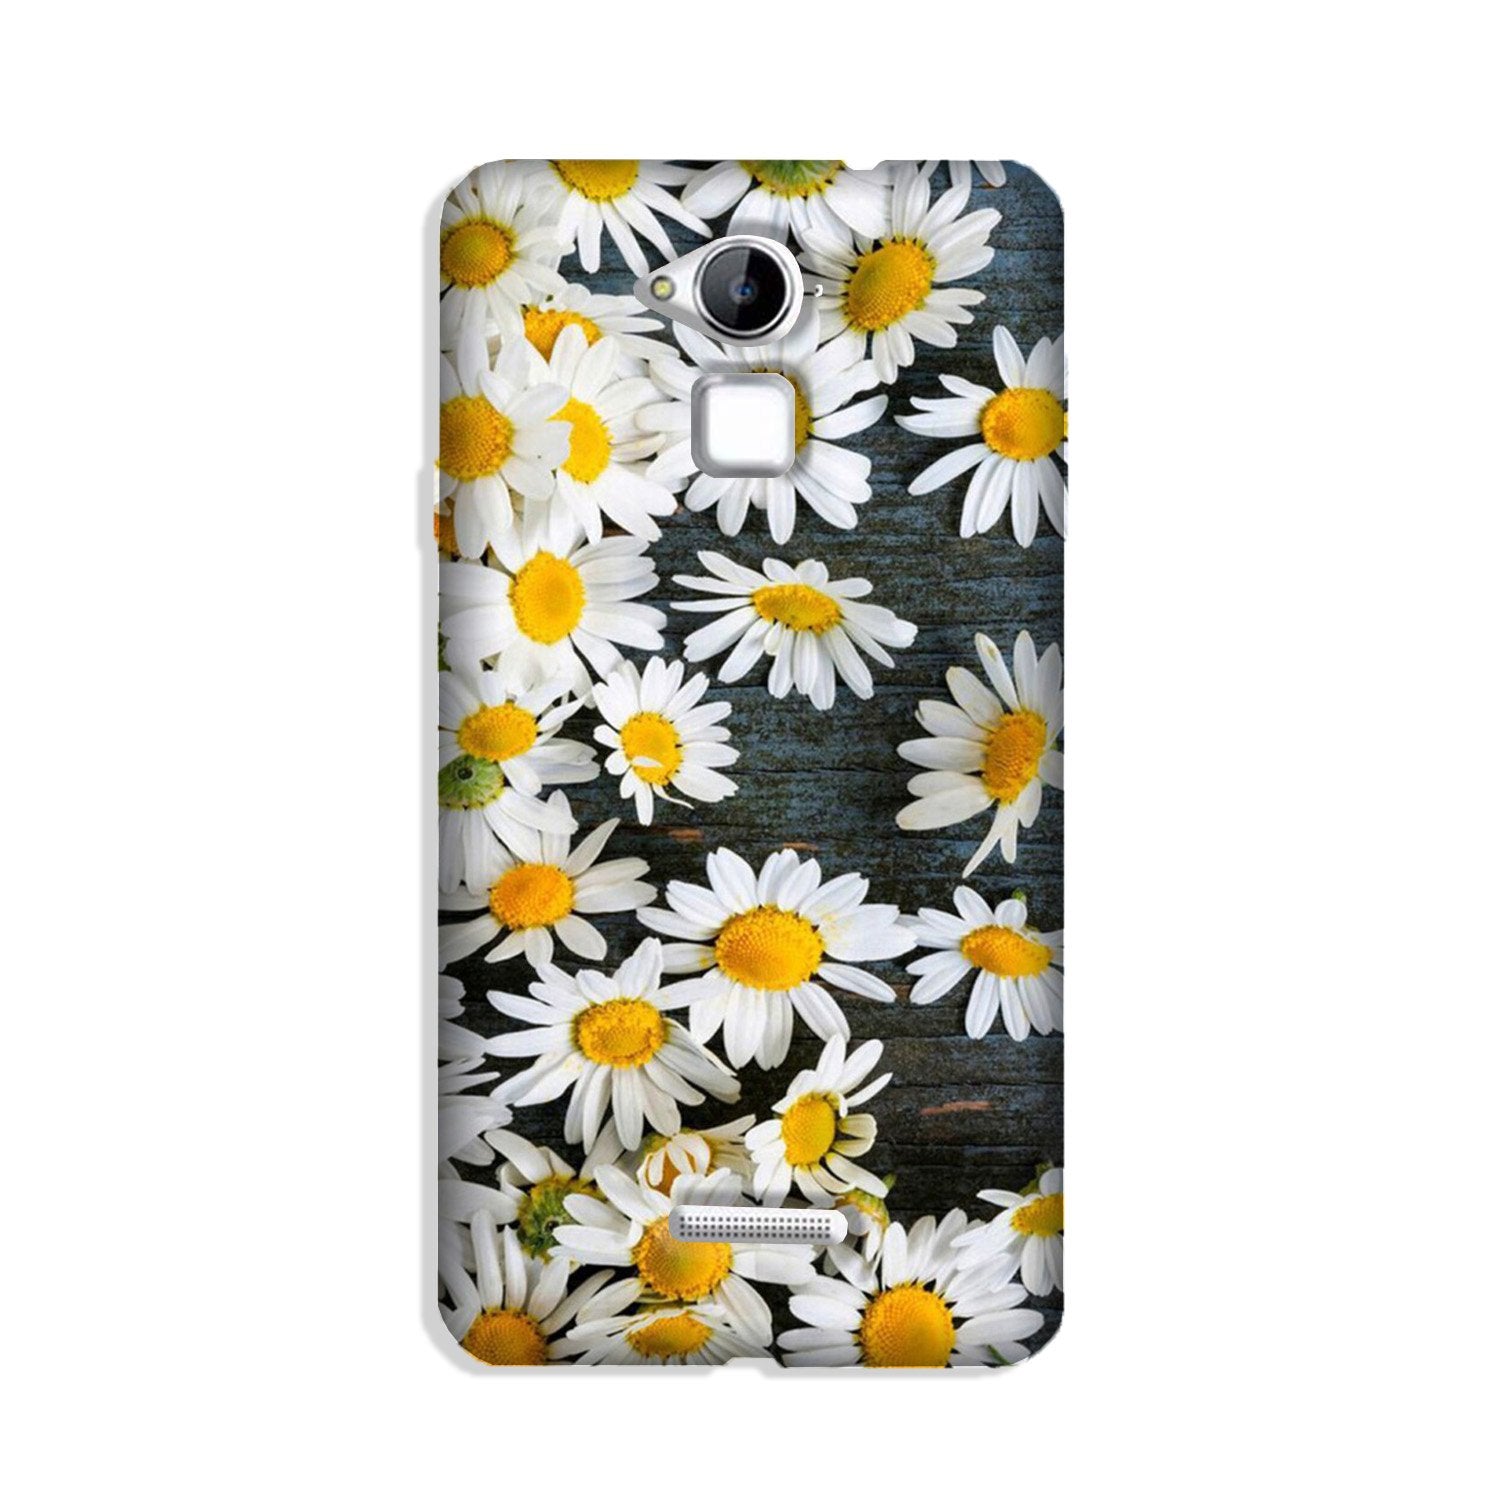 White flowers Case for Coolpad Note 3